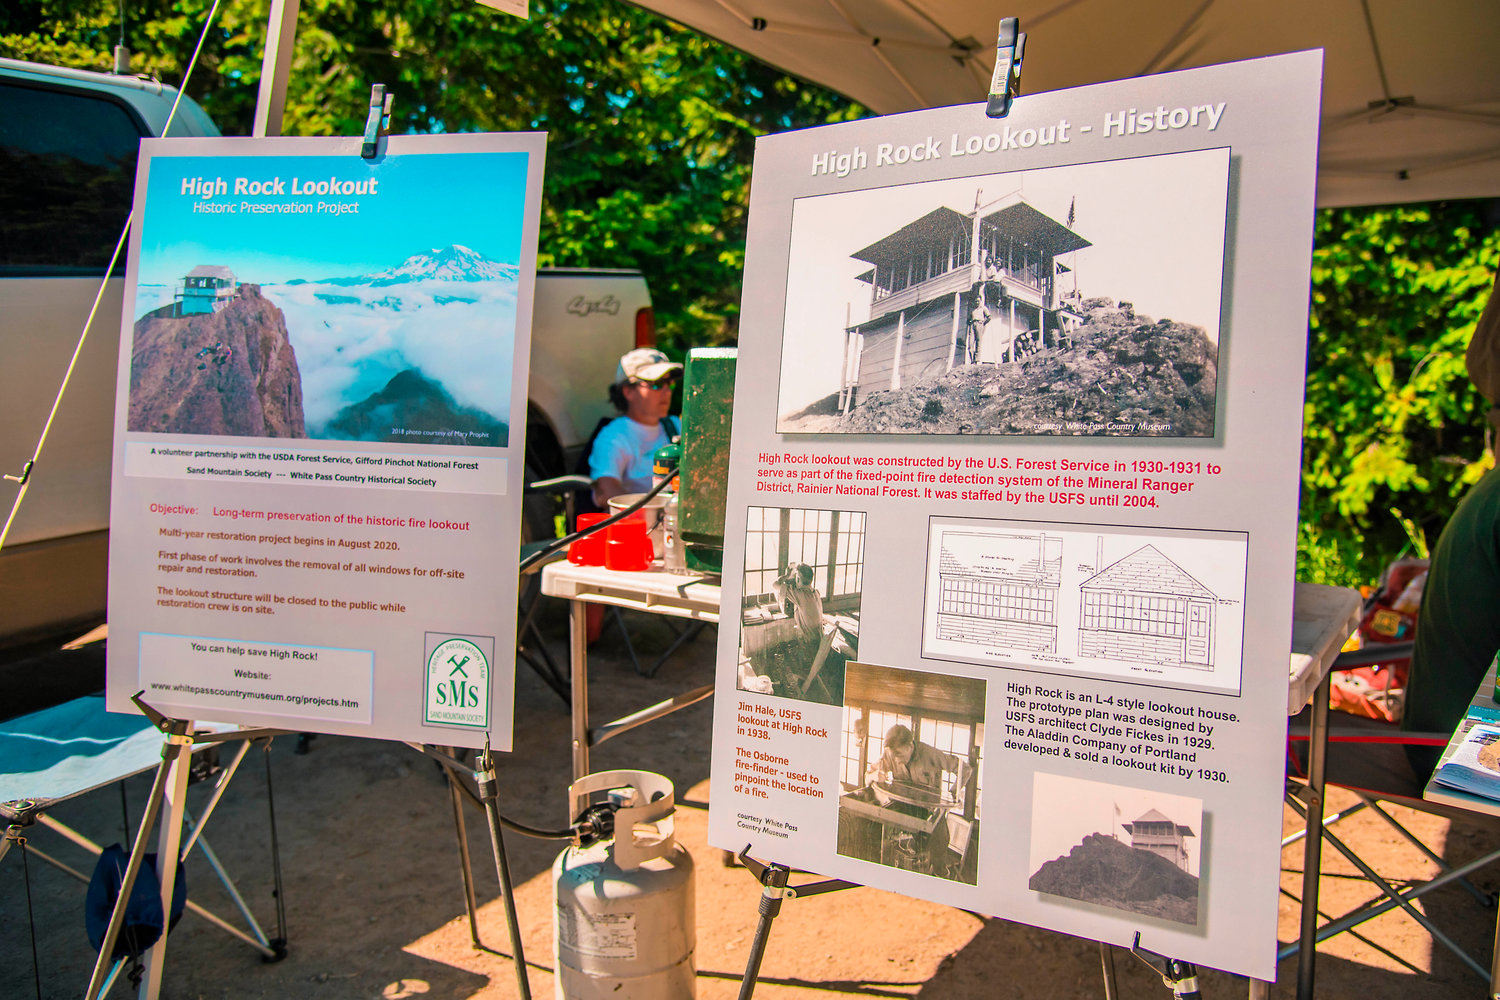 Posters detail the history of High Rock Lookout and goals for the historic preservation project.